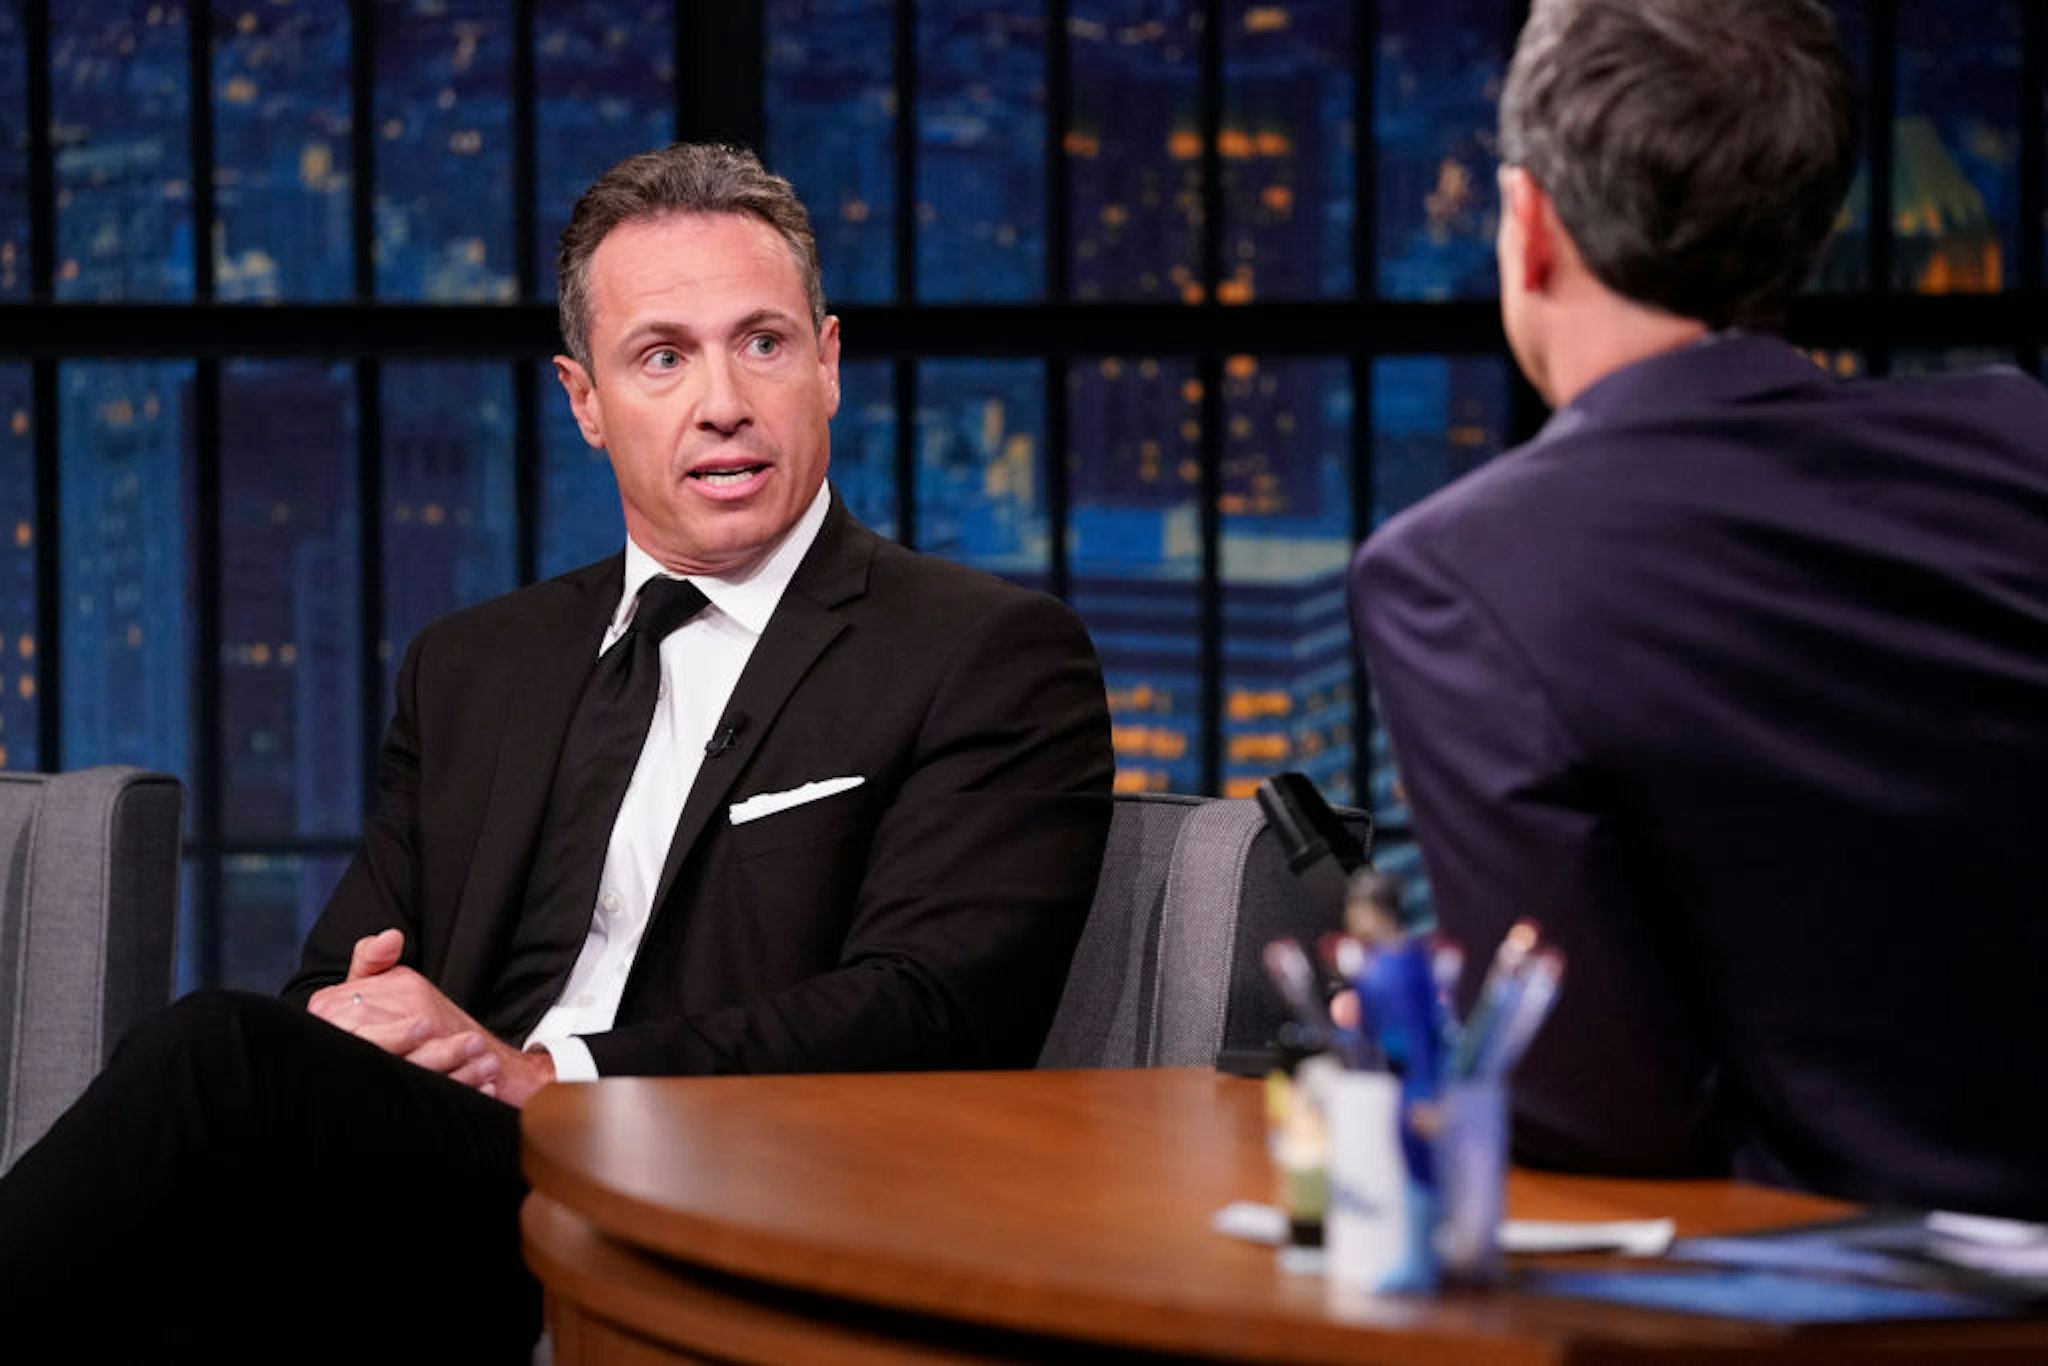 LATE NIGHT WITH SETH MEYERS -- Episode 867 -- Pictured: (l-r) CNN's Chris Cuomo during an interview with host Seth Meyers on August 1, 2019 -- (Photo by: Lloyd Bishop/NBCU Photo Bank/NBCUniversal via Getty Images via Getty Images)